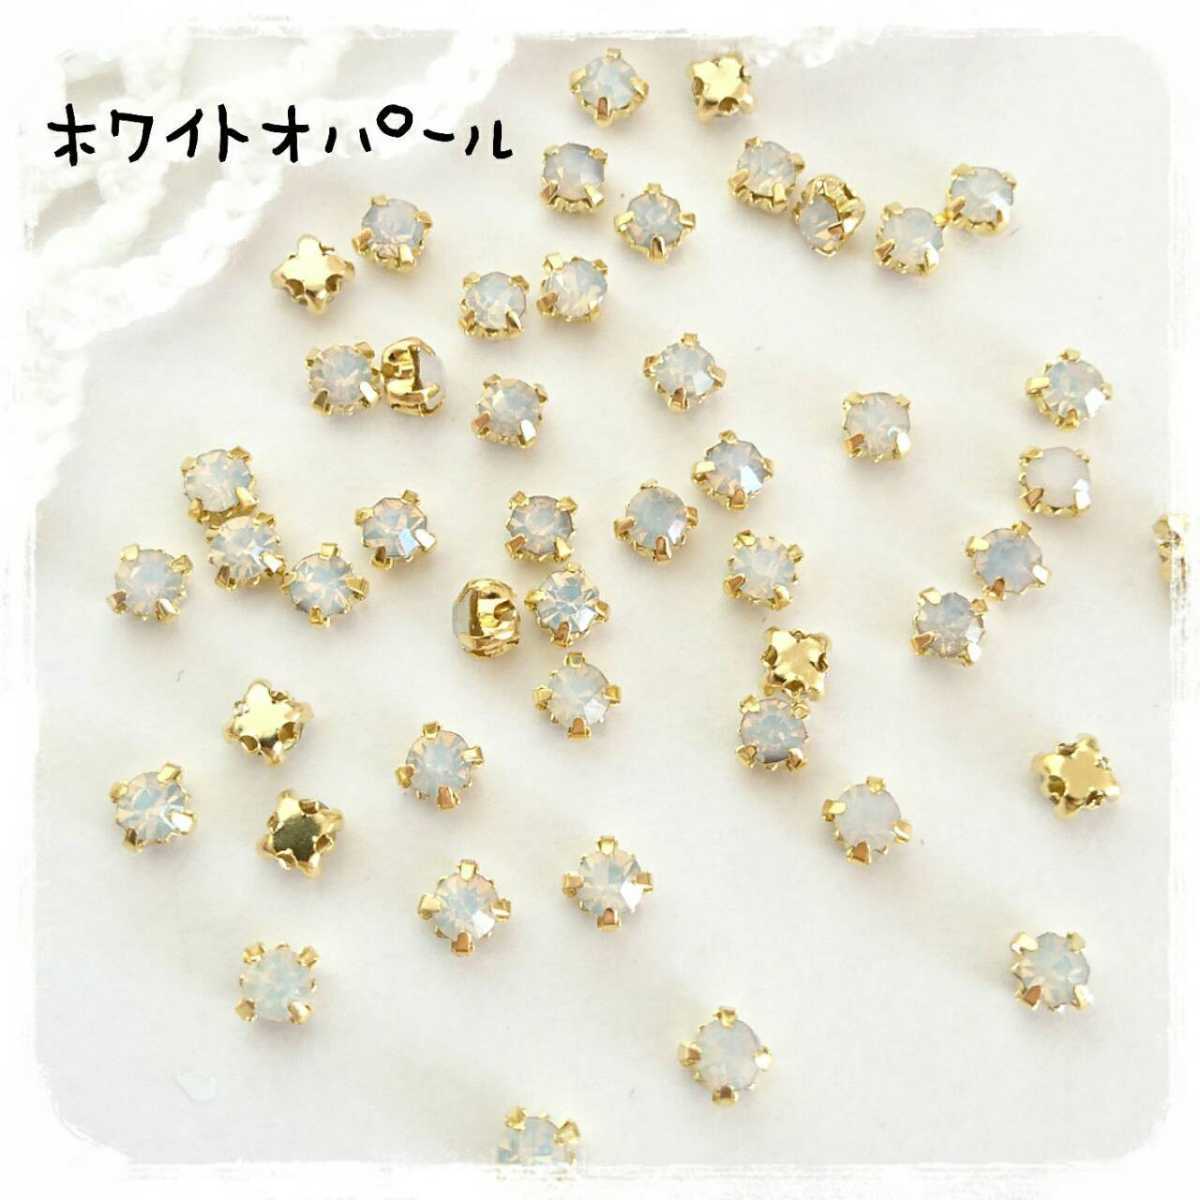  white opal * set in gold seat attaching approximately 3mm 50 piece * deco parts nails hand made 